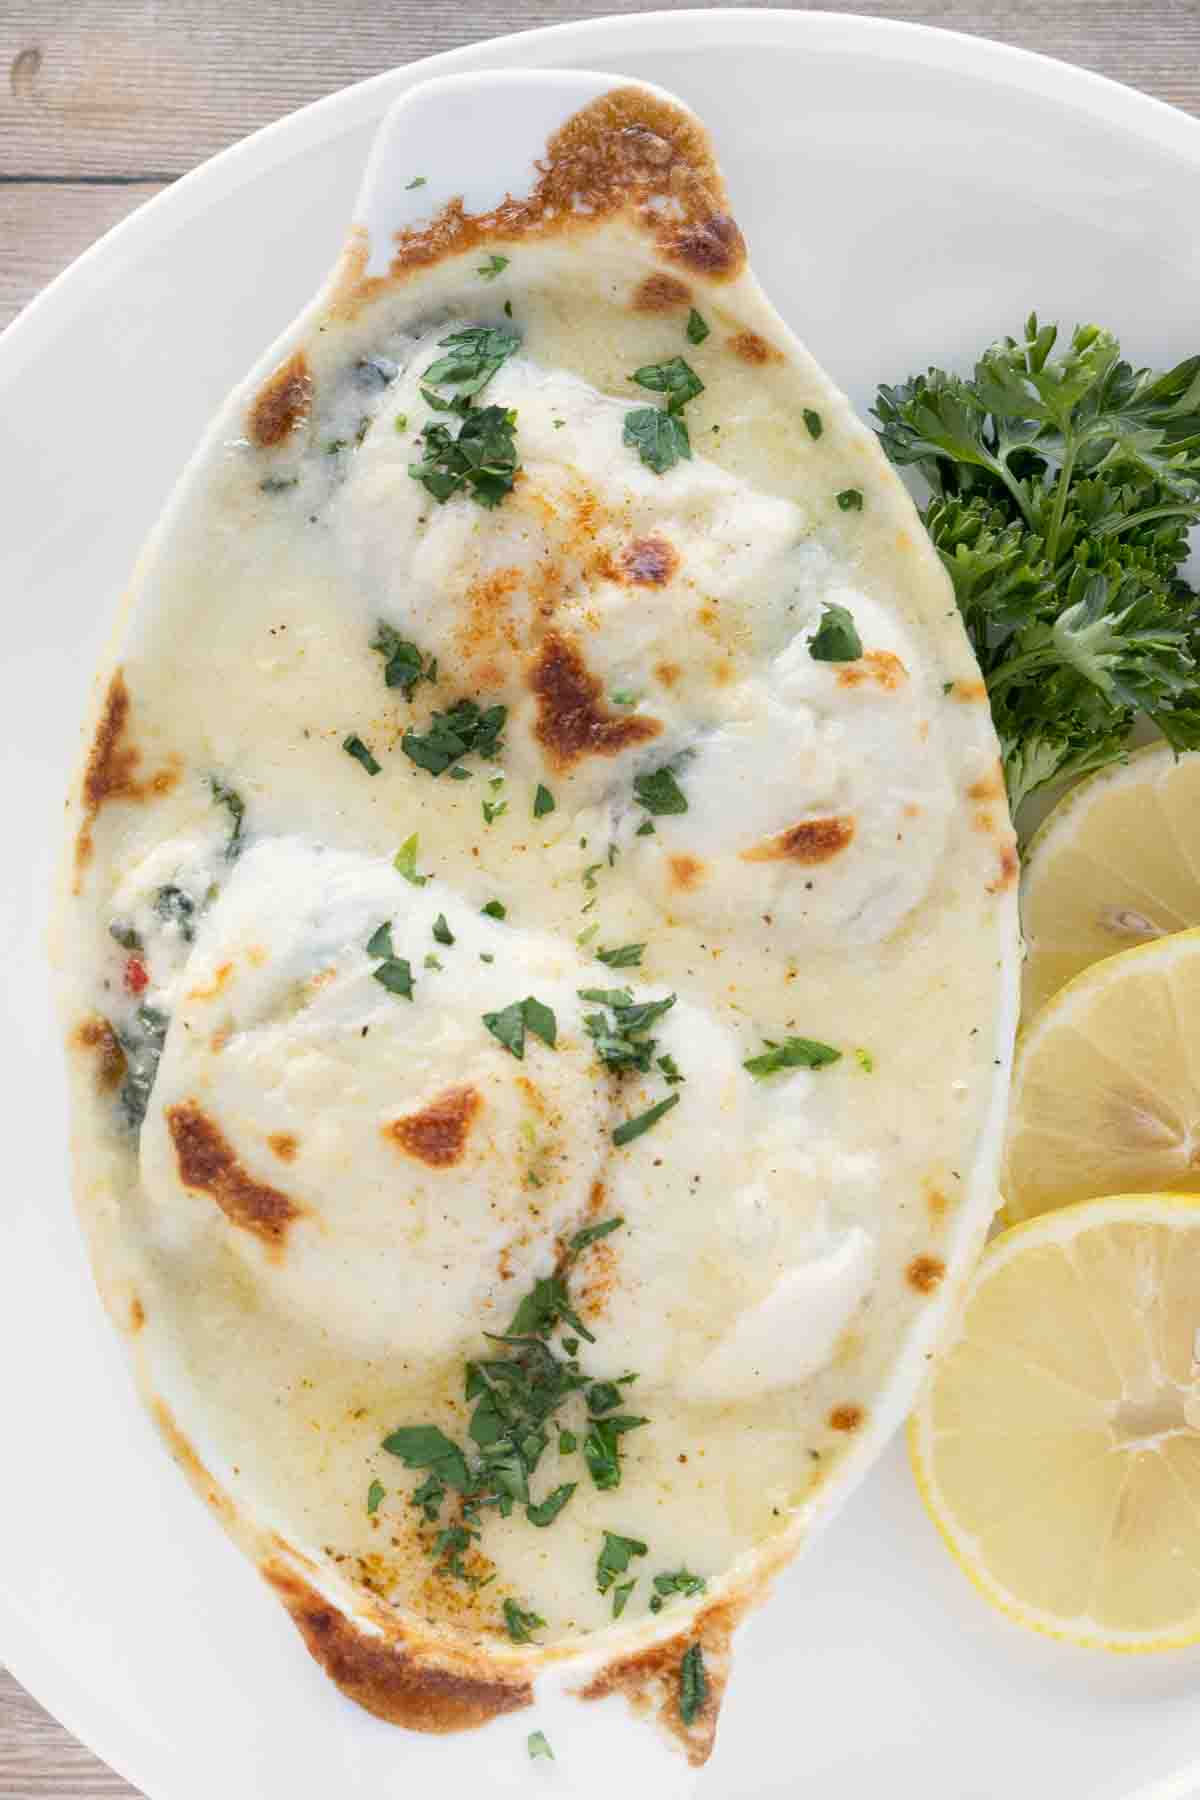 baked stuffed flounder in a white casserole dish